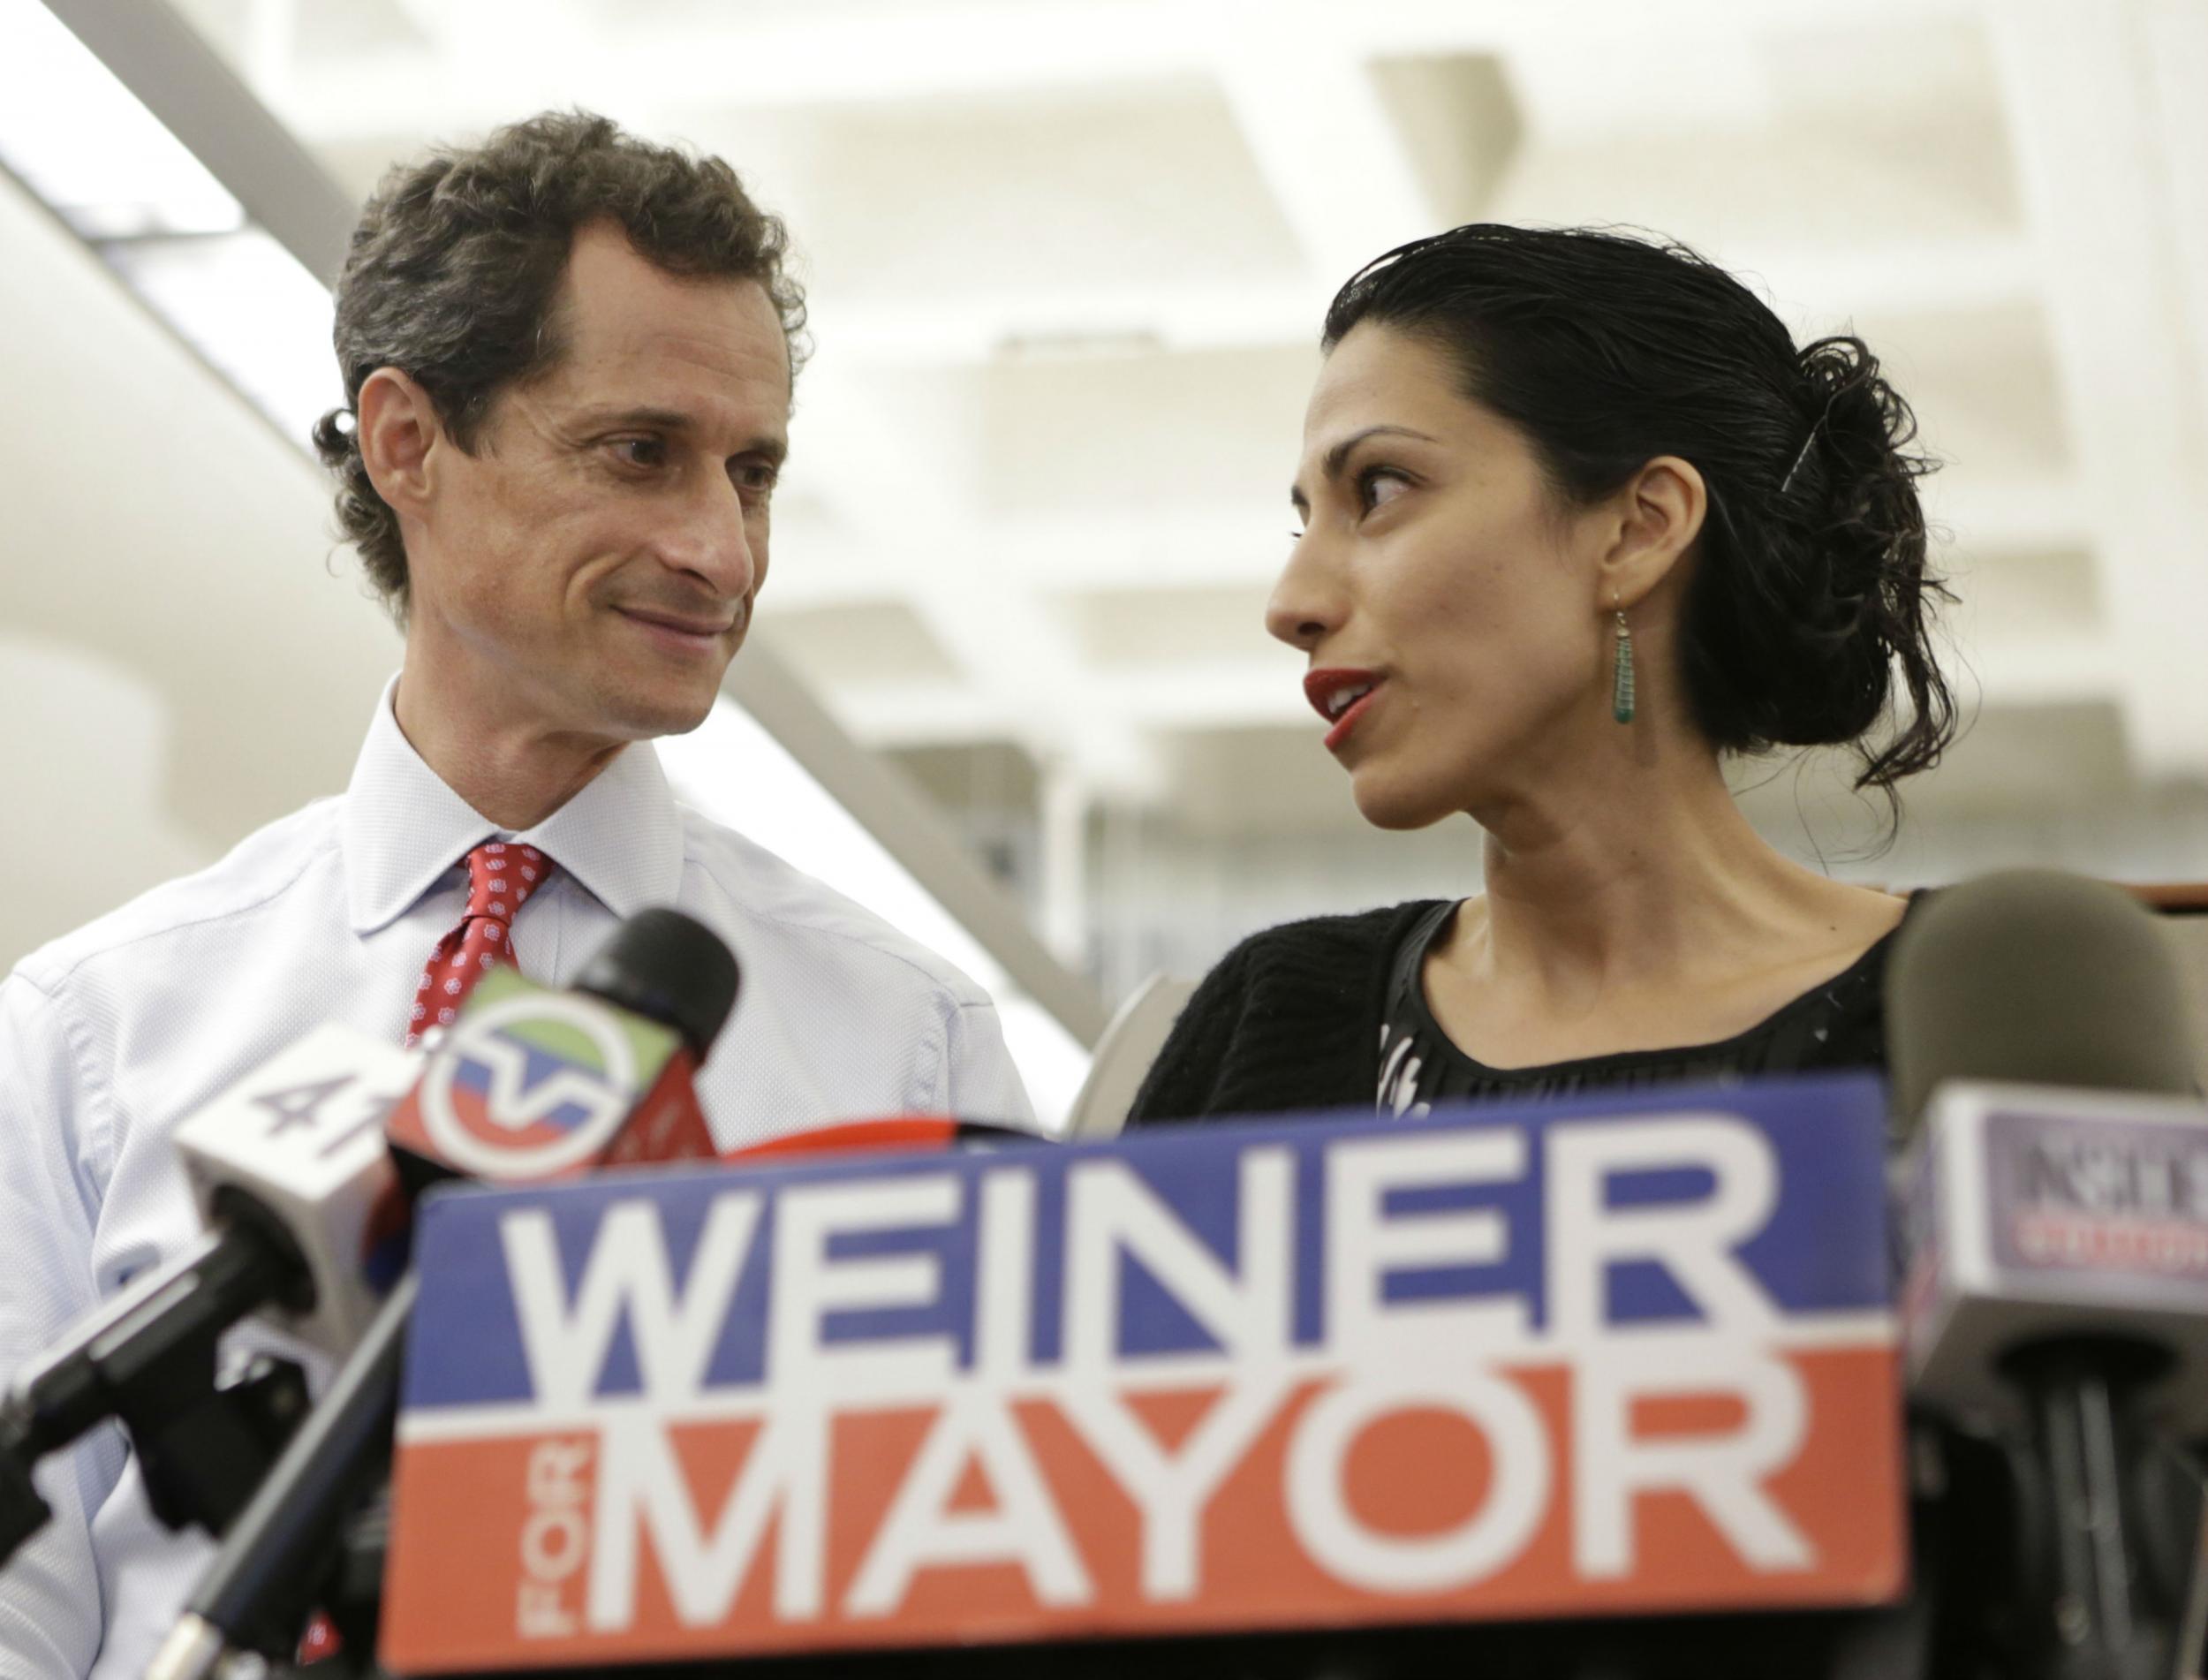 Huma Abedin and her husband Anthony Weiner at a press conference in 2013